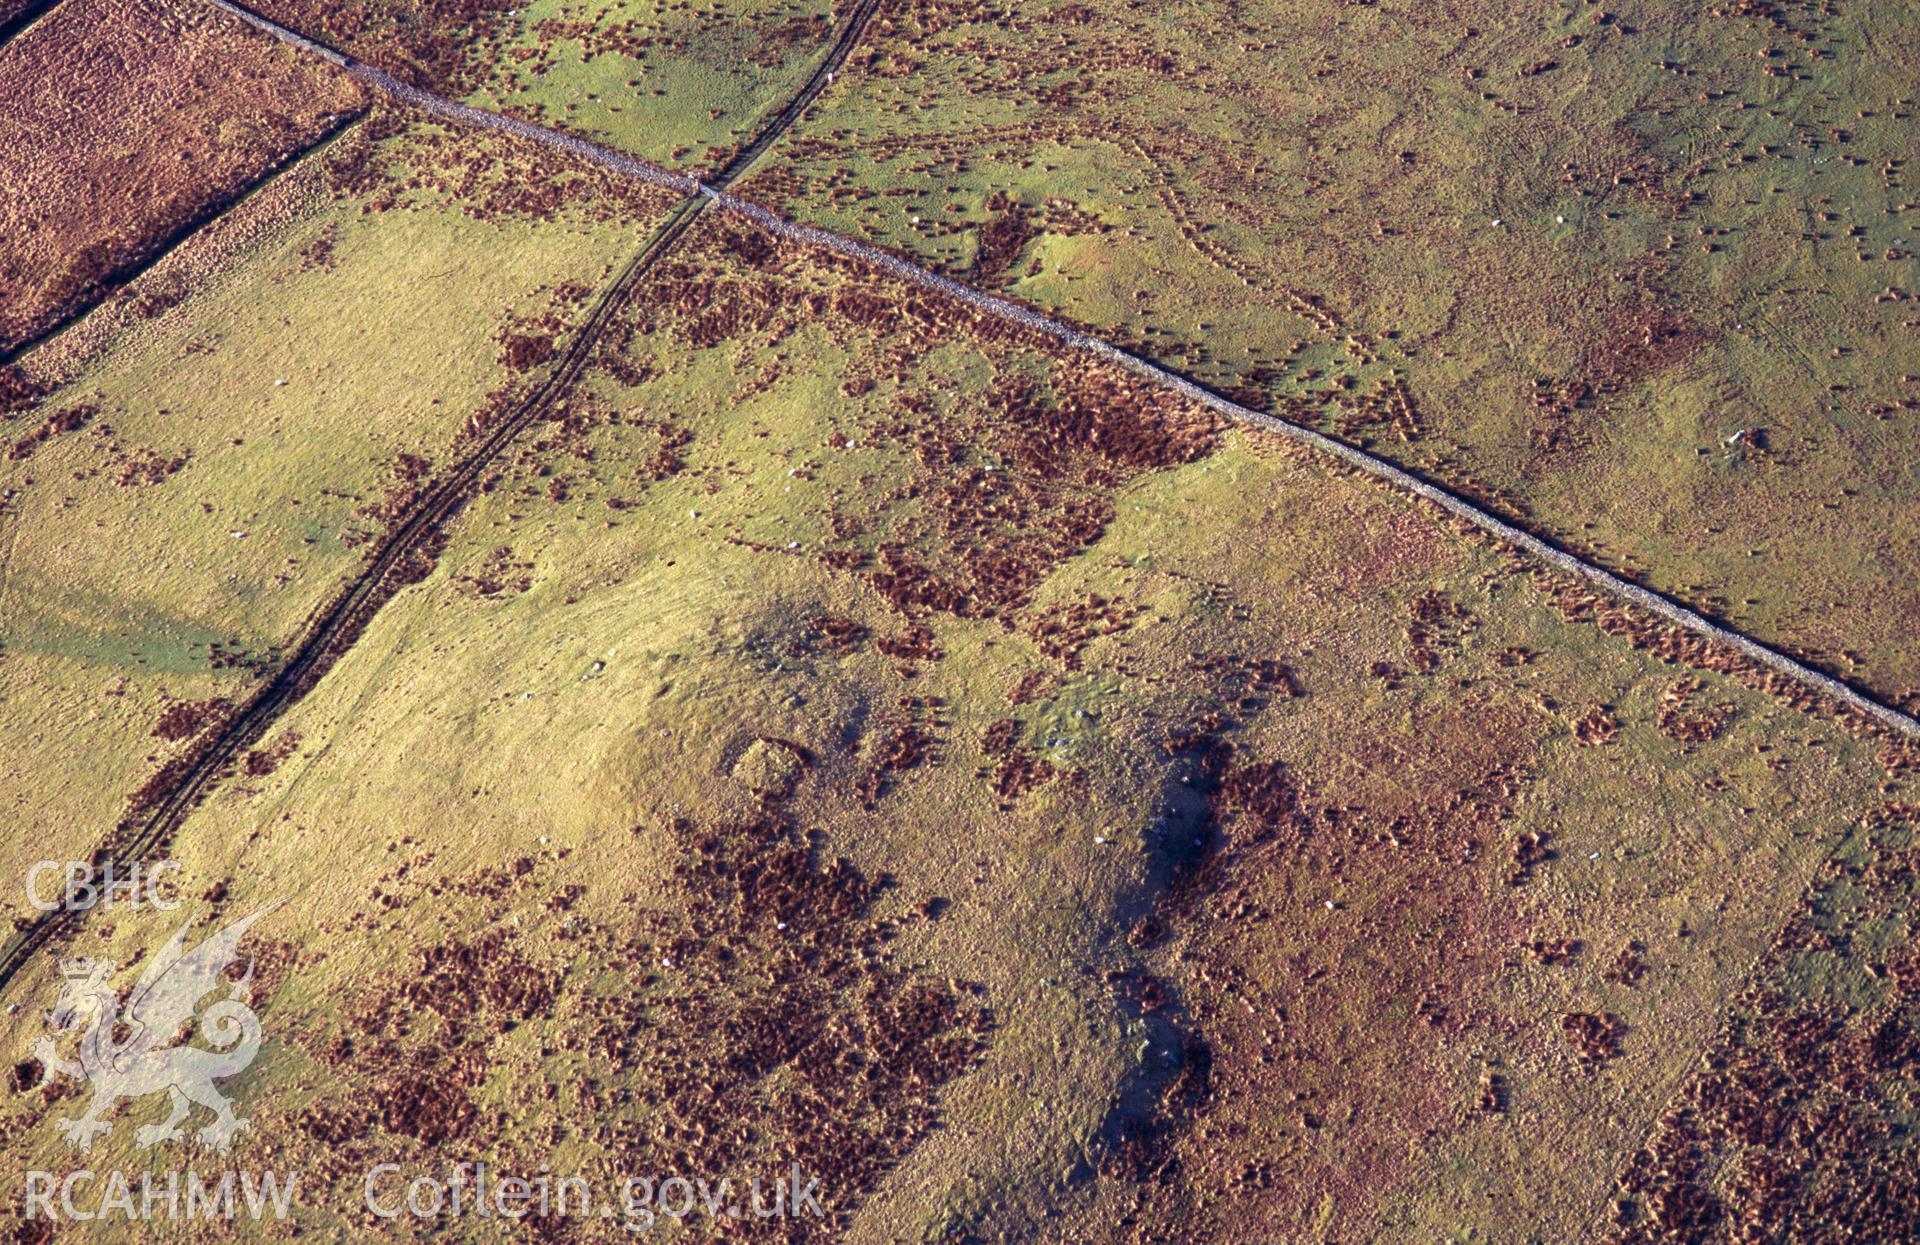 RCAHMW colour oblique aerial photograph of Fortlet. Taken by C R Musson on 12/04/1995